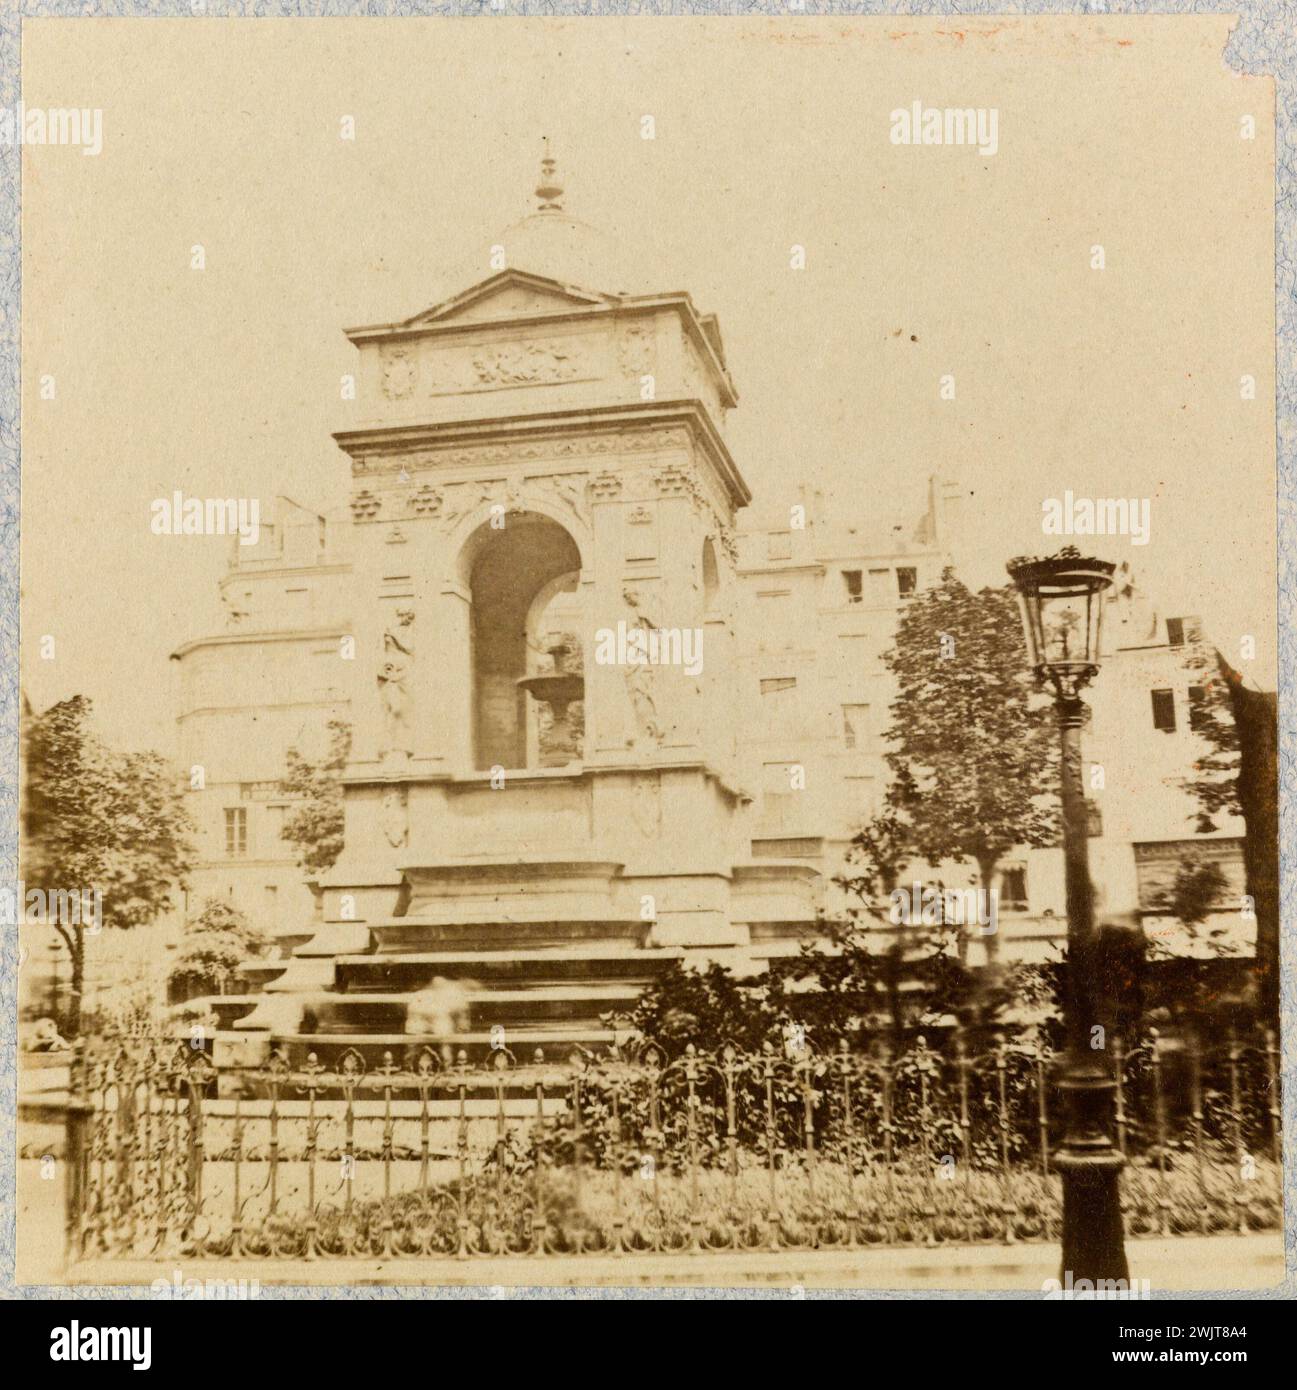 Fountain of the innocents. Paris (1 arr.). Anonymous photography. Albumin paper draw. Paris, Carnavalet museum. Paris, Carnavalet museum. 144166-13 IER IE I 1ER 1E 1 ARRONDISSEMENT Stock Photo